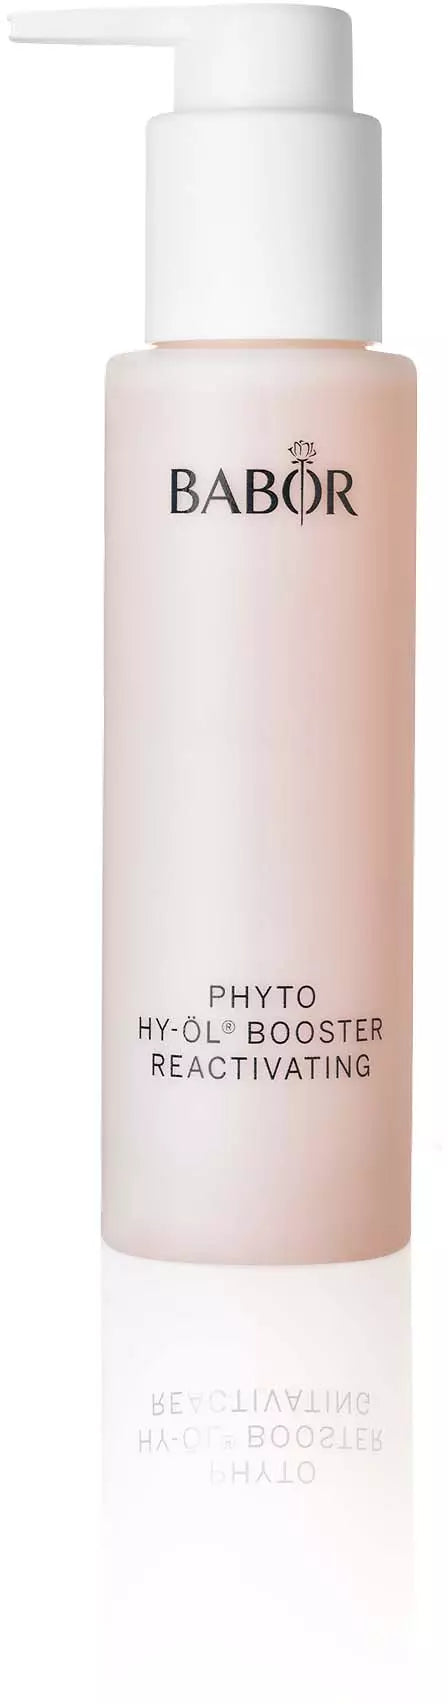 Babor Phyto HY-Øl Booster Reactivating